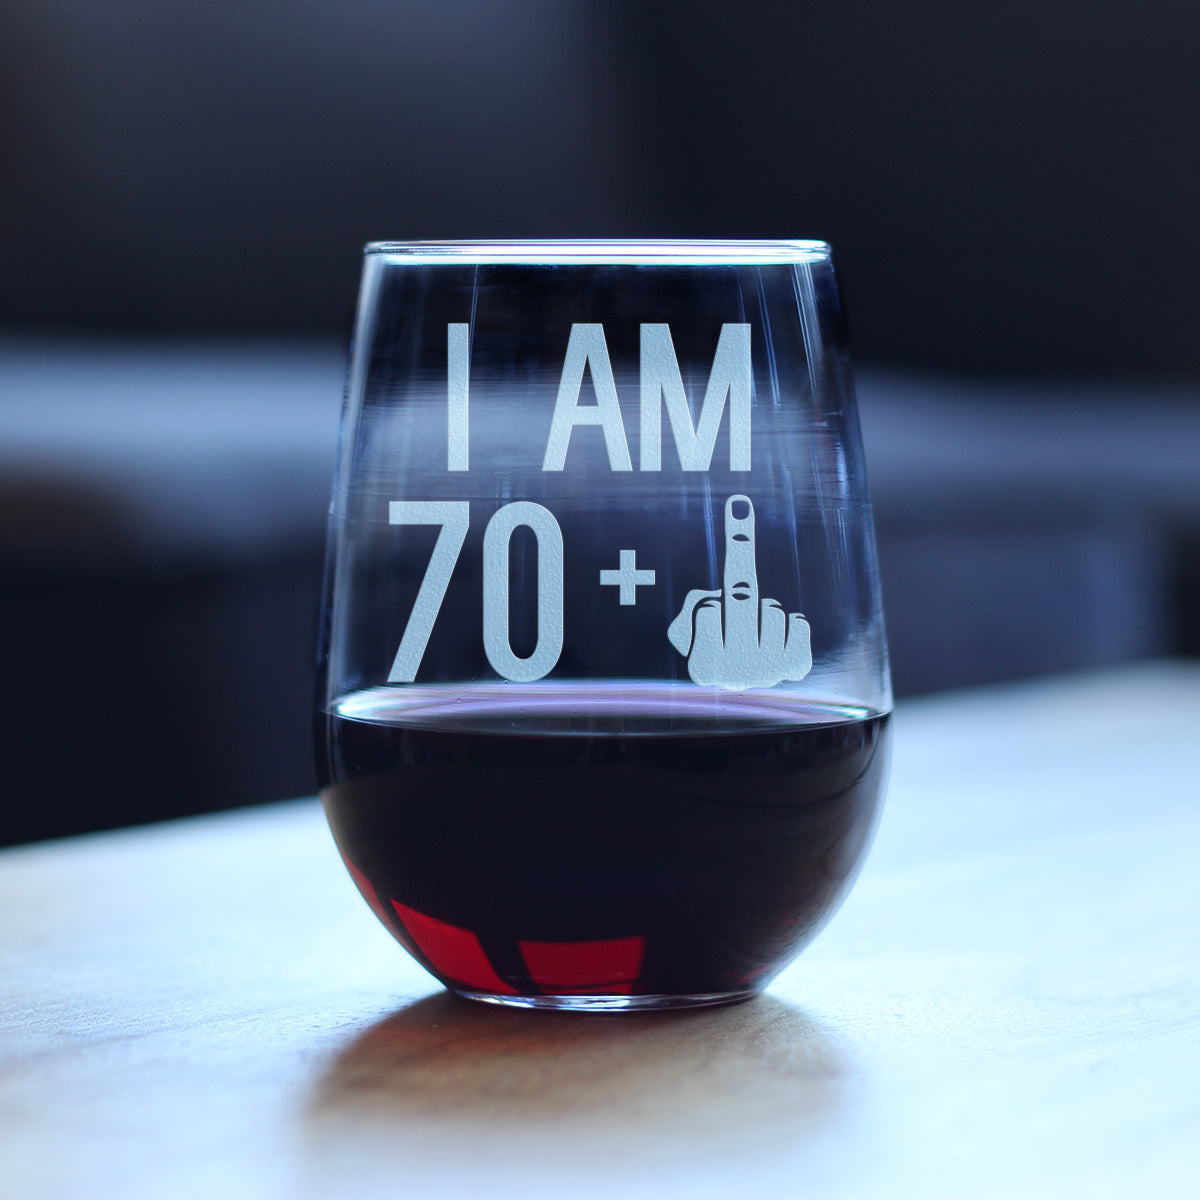 70 + 1 Middle Finger - 71st Birthday Stemless Wine Glass for Women &amp; Men - Cute Funny Wine Gift Idea - Unique Personalized Bday Glasses for Mom, Dad, Friend Turning 71 - Drinking Party Decoration